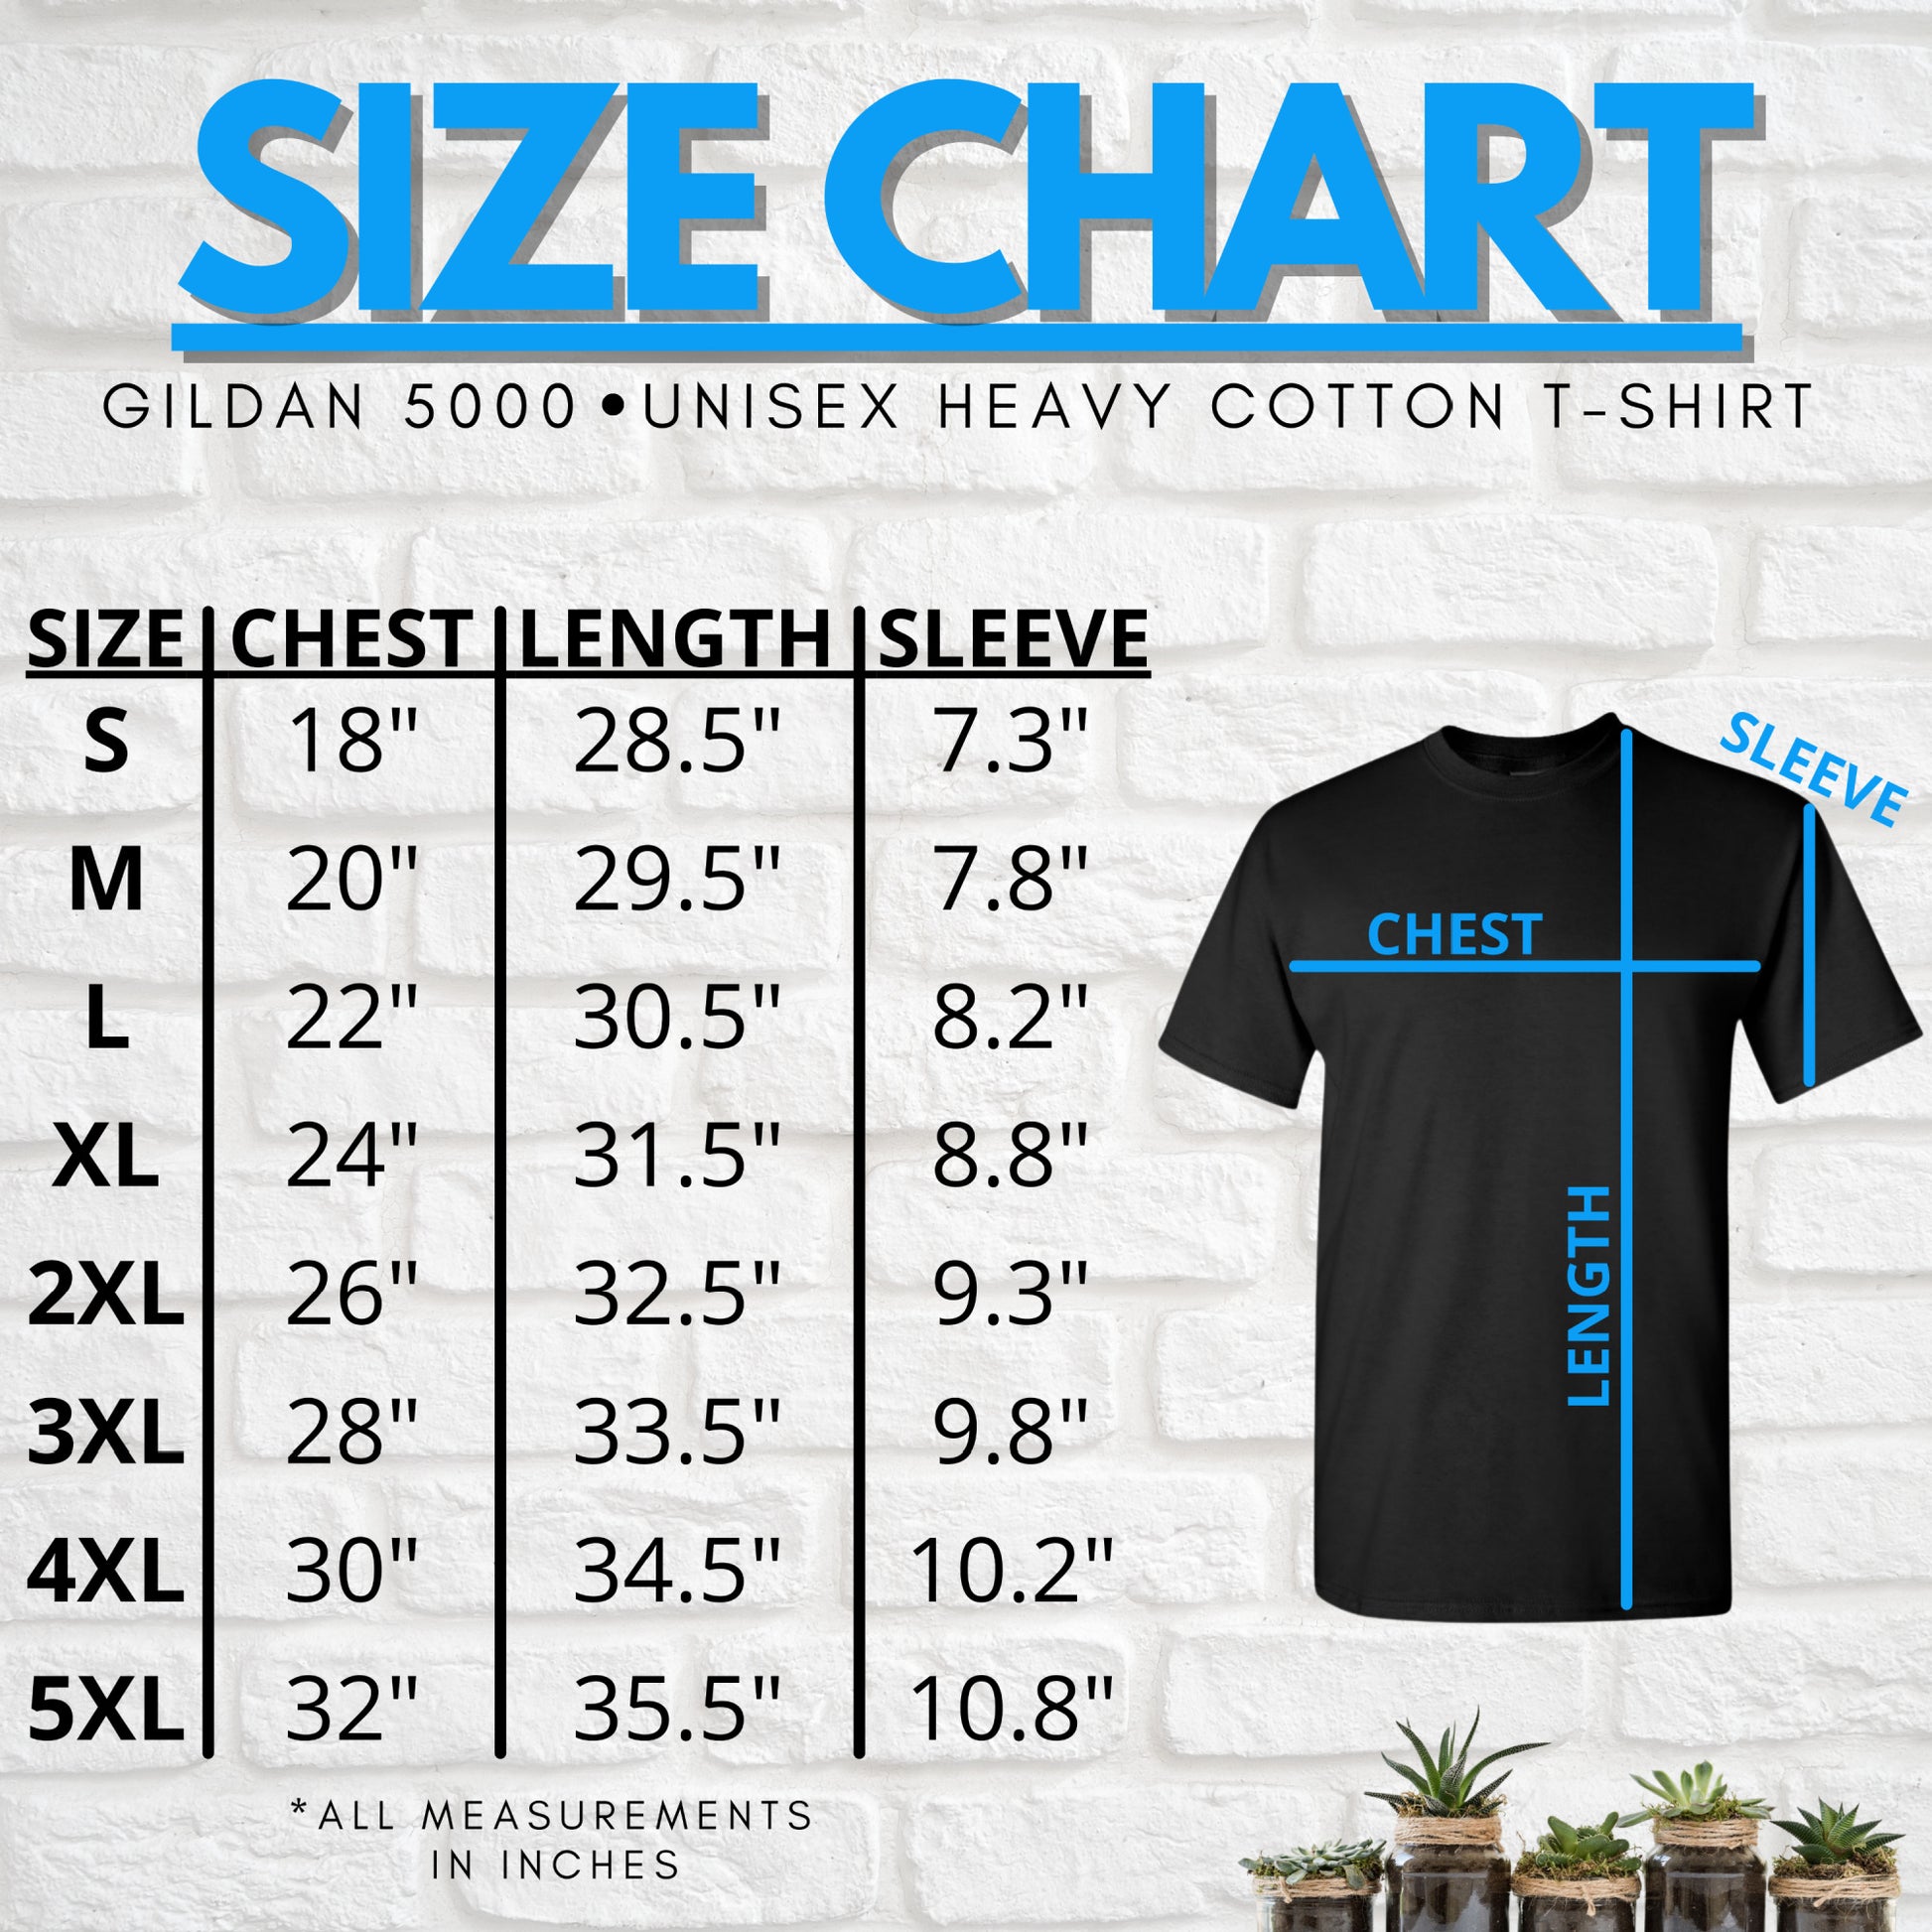 The size chart